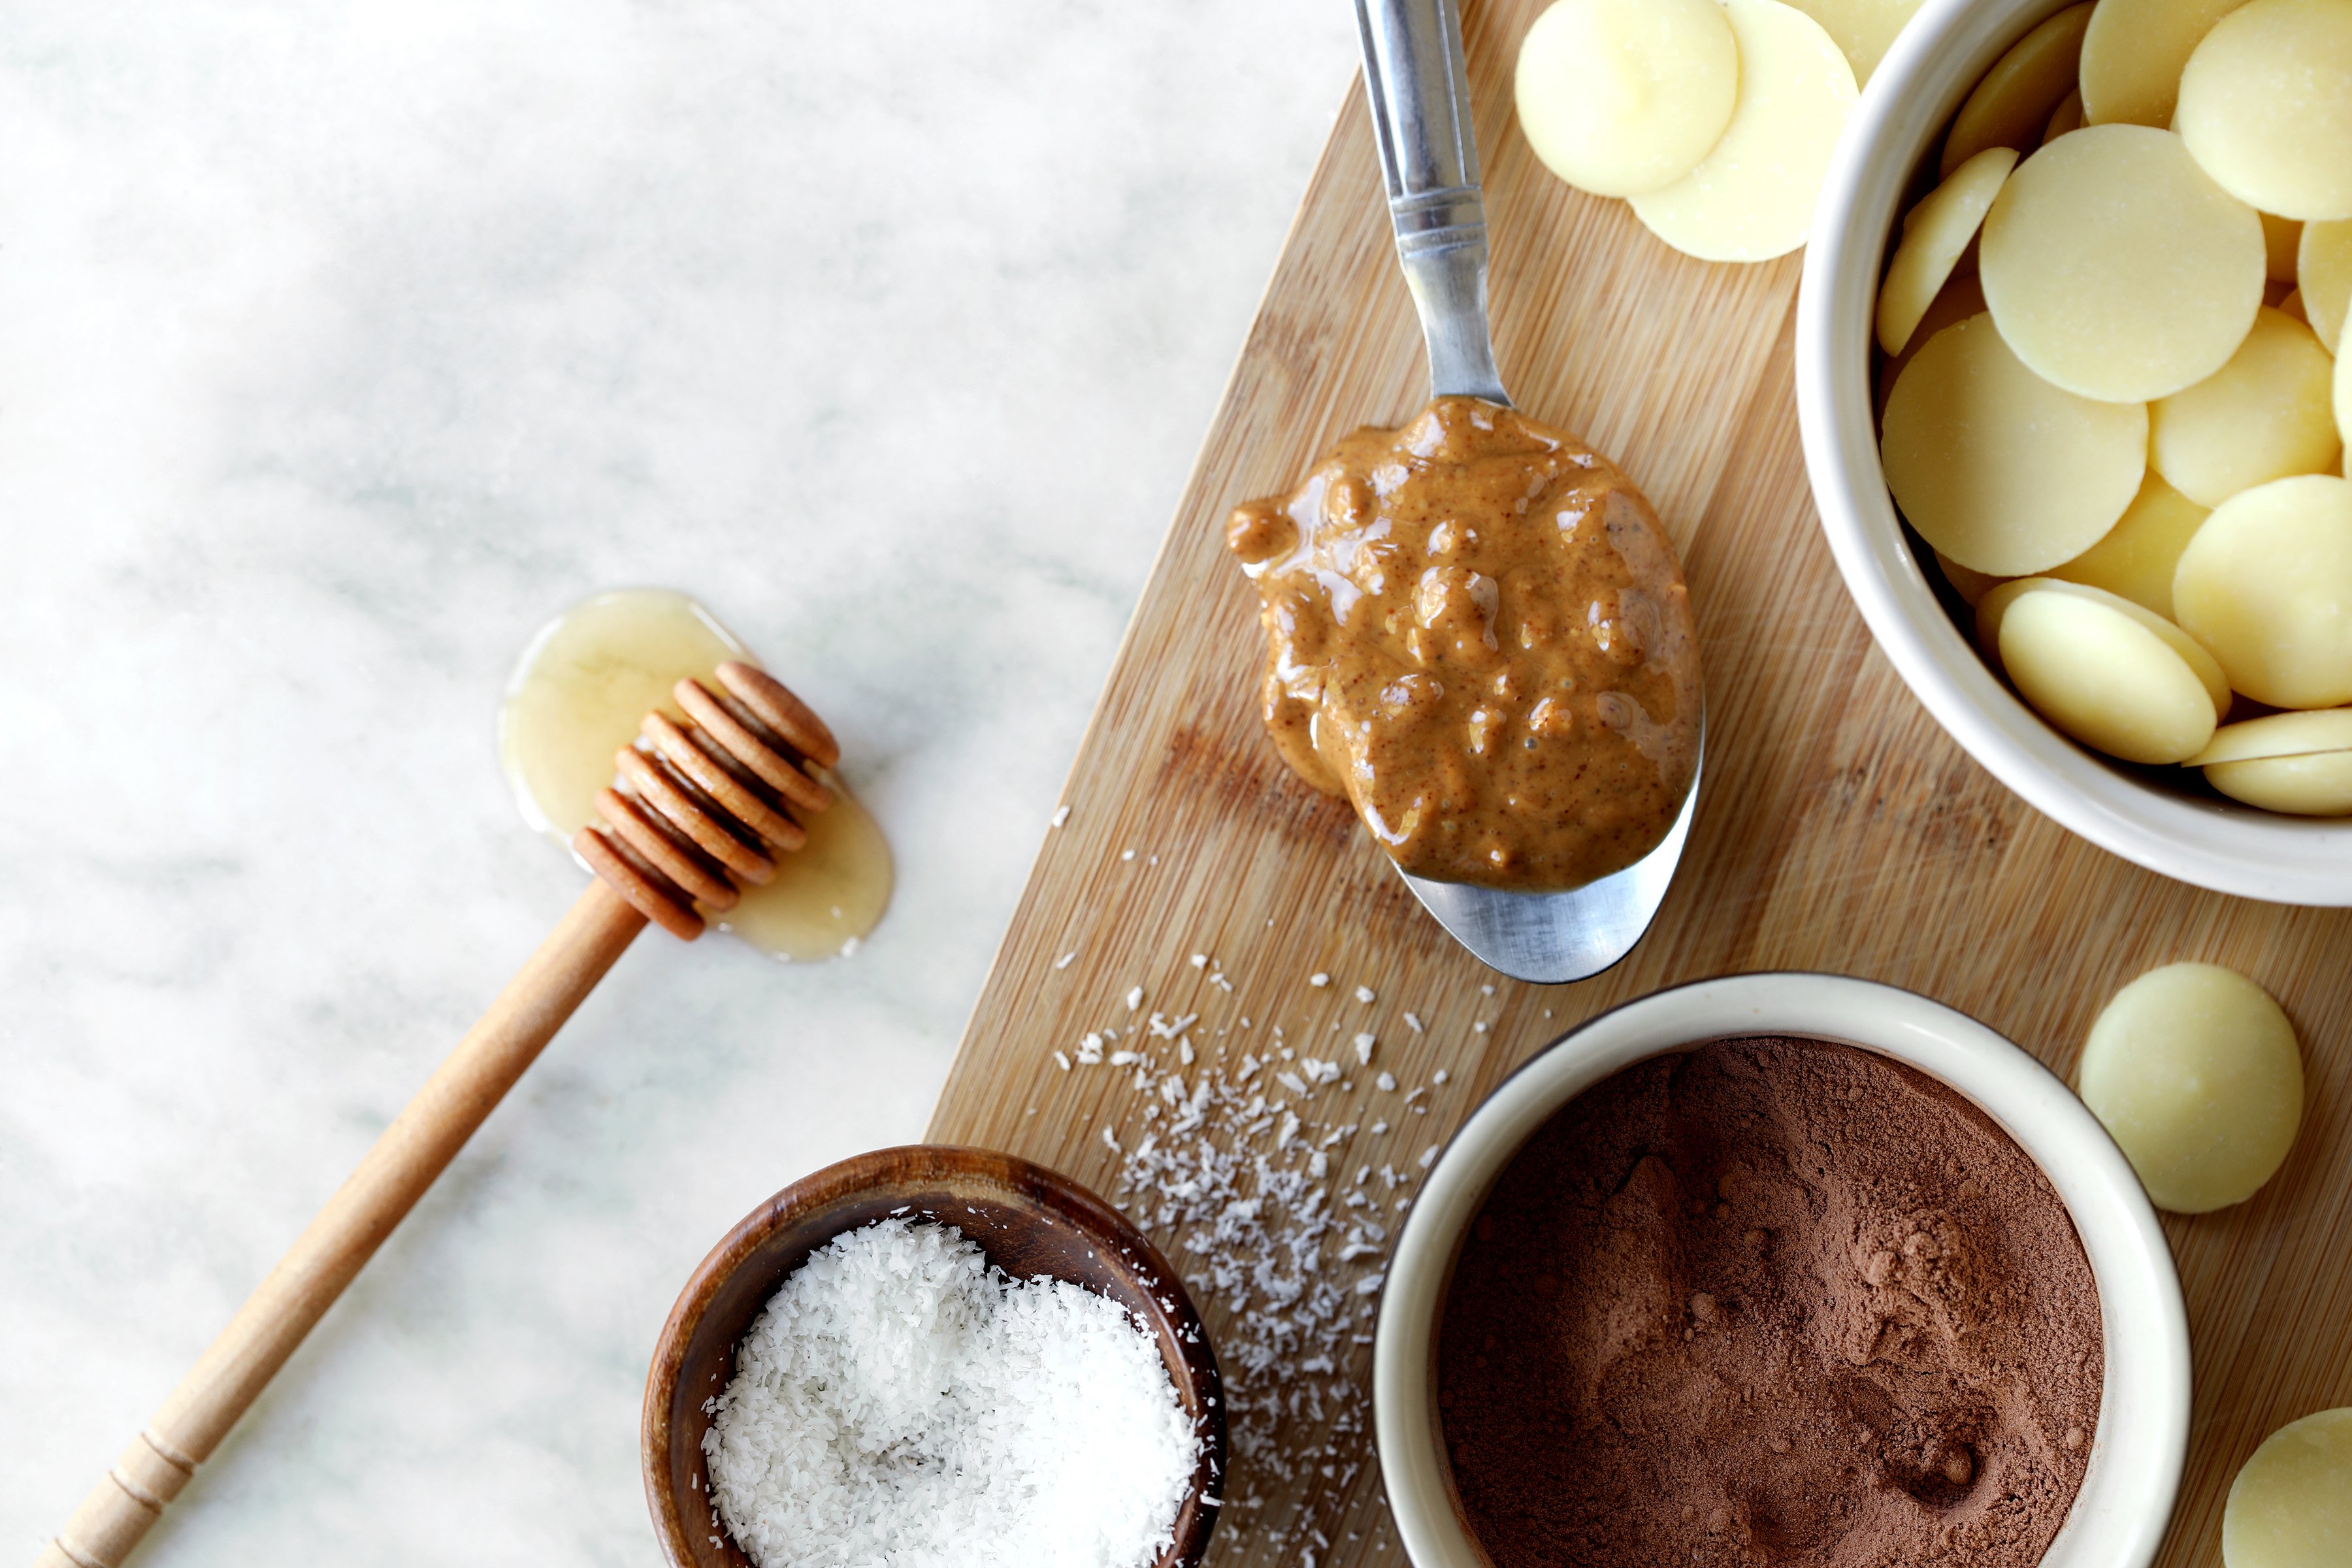 Ingredients for making herbal chocolate bars include organic raw cocoa wafers, roasted cocoa powder, organic local honey, and almond butter. 